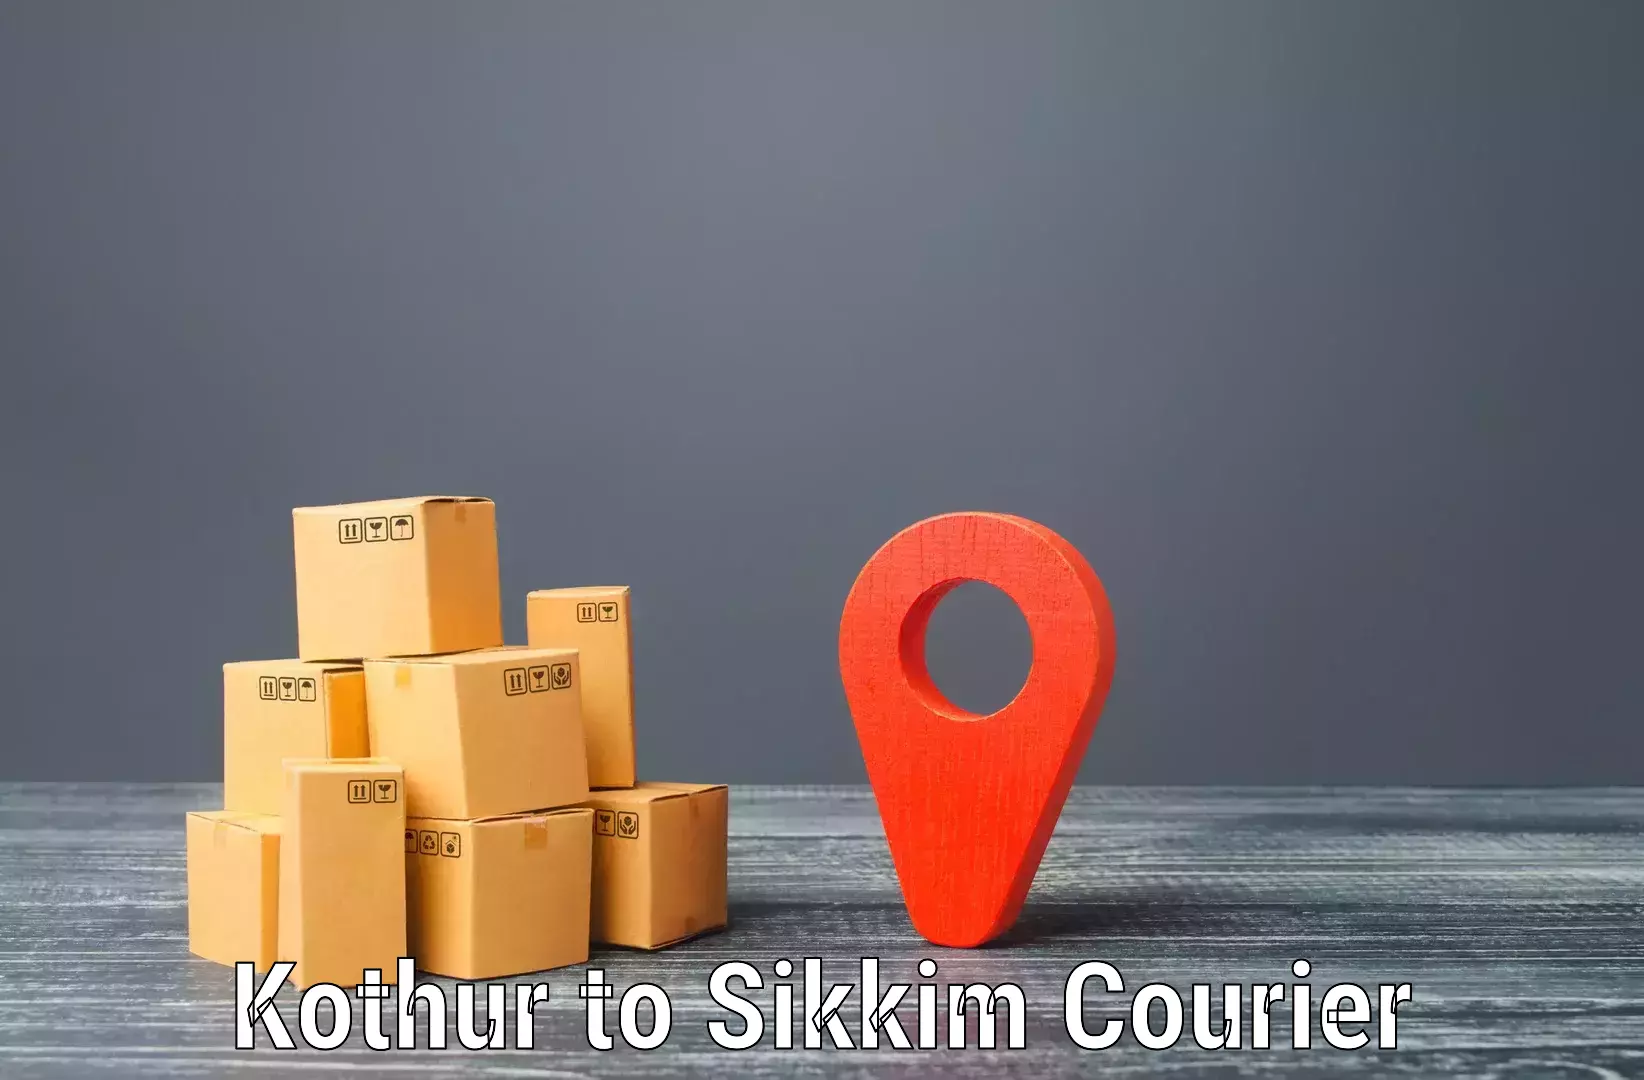 Nationwide shipping services Kothur to South Sikkim